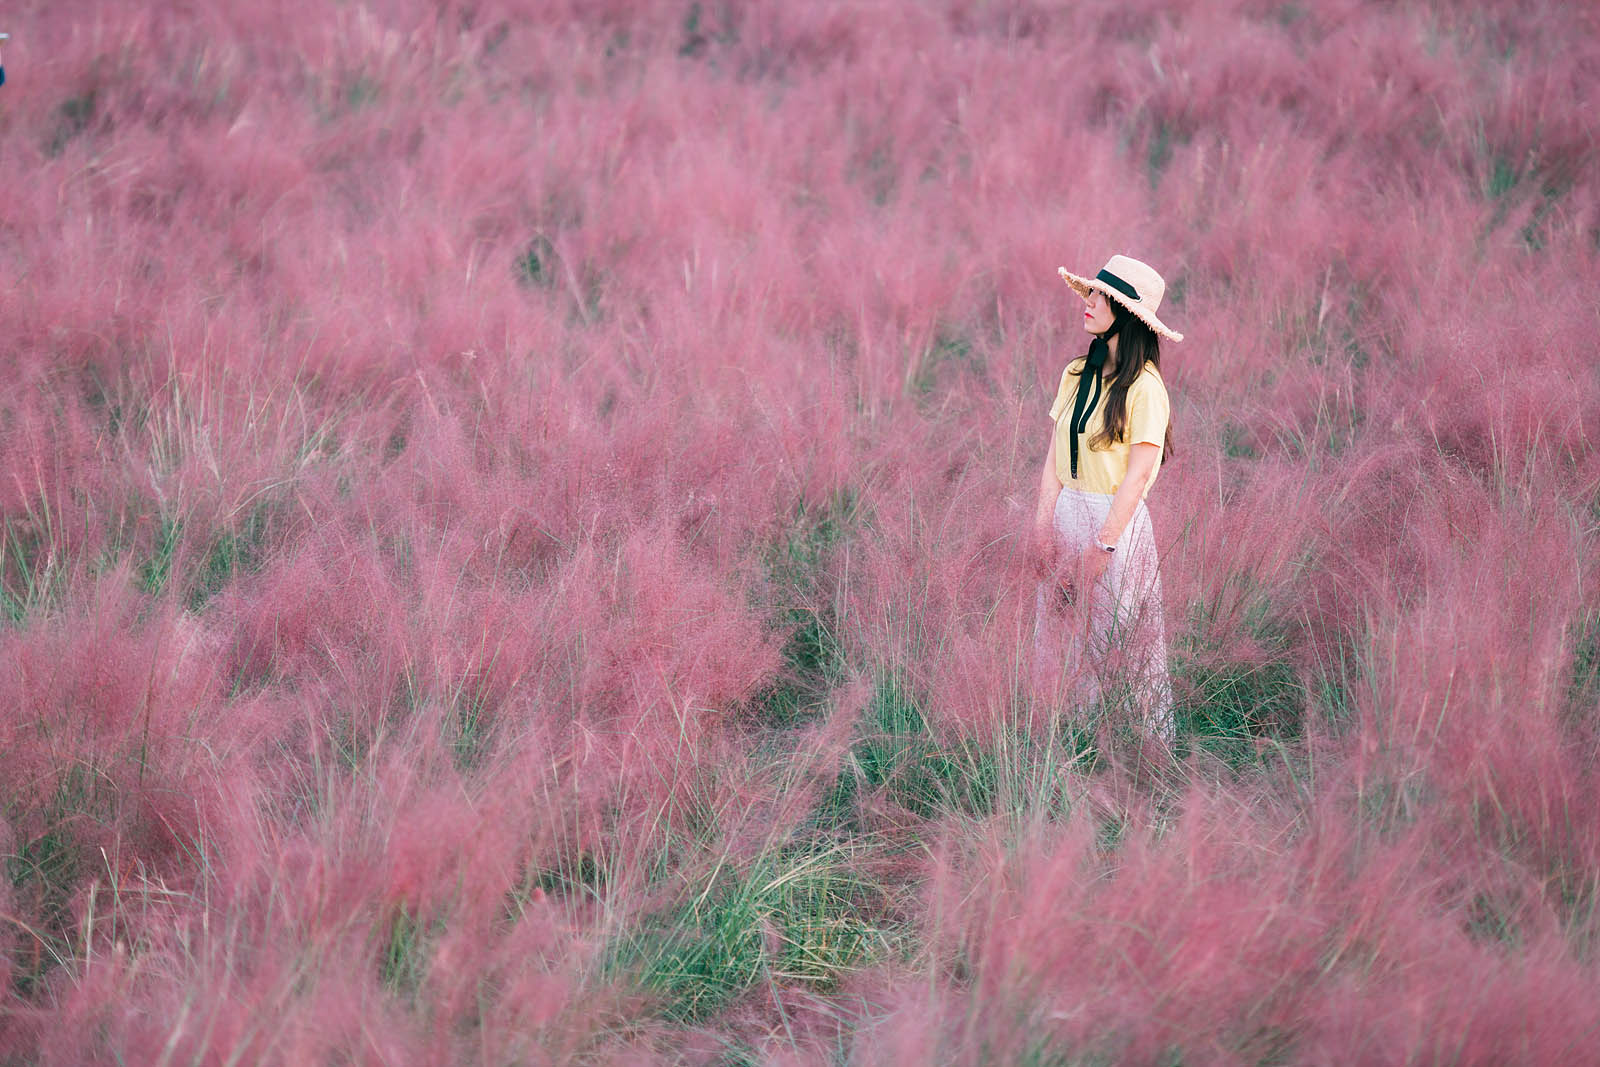 The most instragramable place in Seoul this Autumn - Pink Muhly Garden